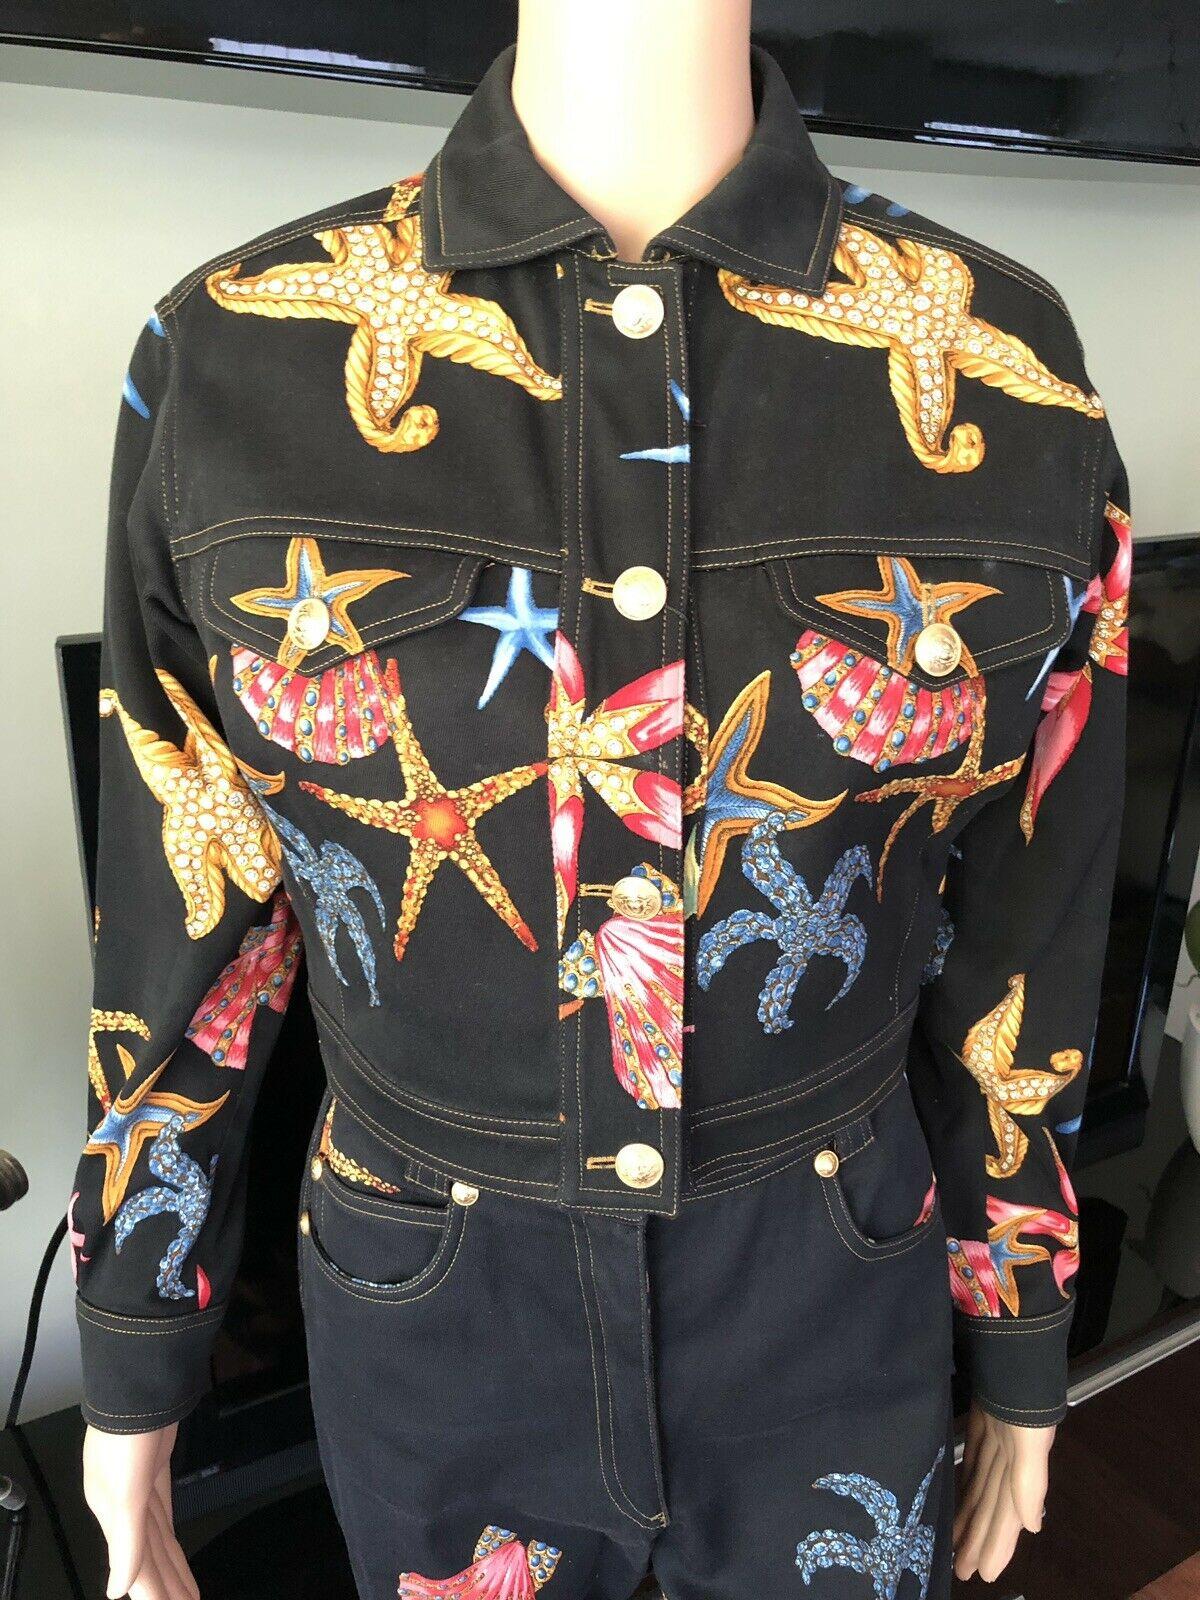 Vintage GIANNI VERSACE S/S 1992 Trezor de la Mer Jacket & Pants Suit 2 Piece Set IT 42

From the Spring/Summer 1992 Collection. Black and multicolor Versace denim jacket with starfish print throughout, pointed collar, two pockets at bust and button